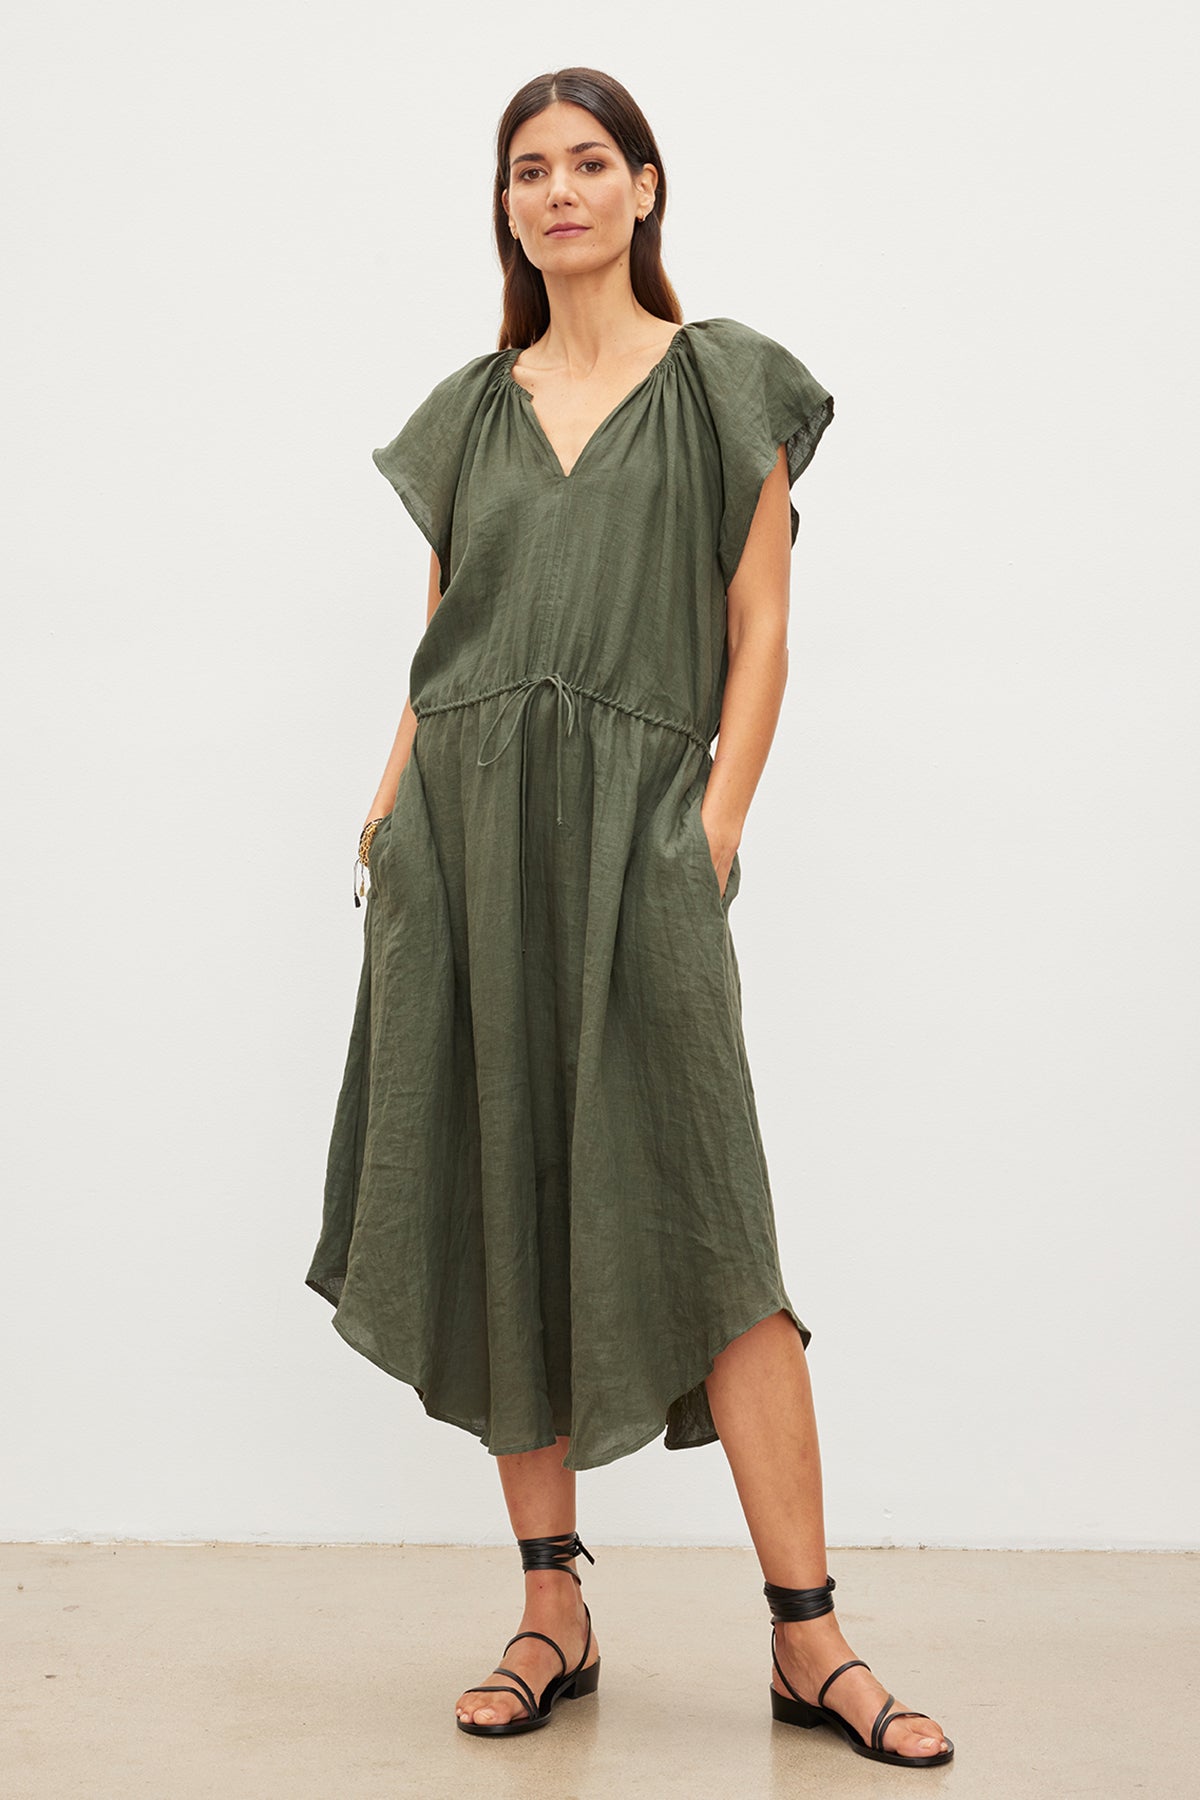   A woman stands in a studio, wearing a Velvet by Graham & Spencer green woven linen midi dress with a drawstring waist and black sandals. She has shoulder-length brown hair and a neutral expression. 